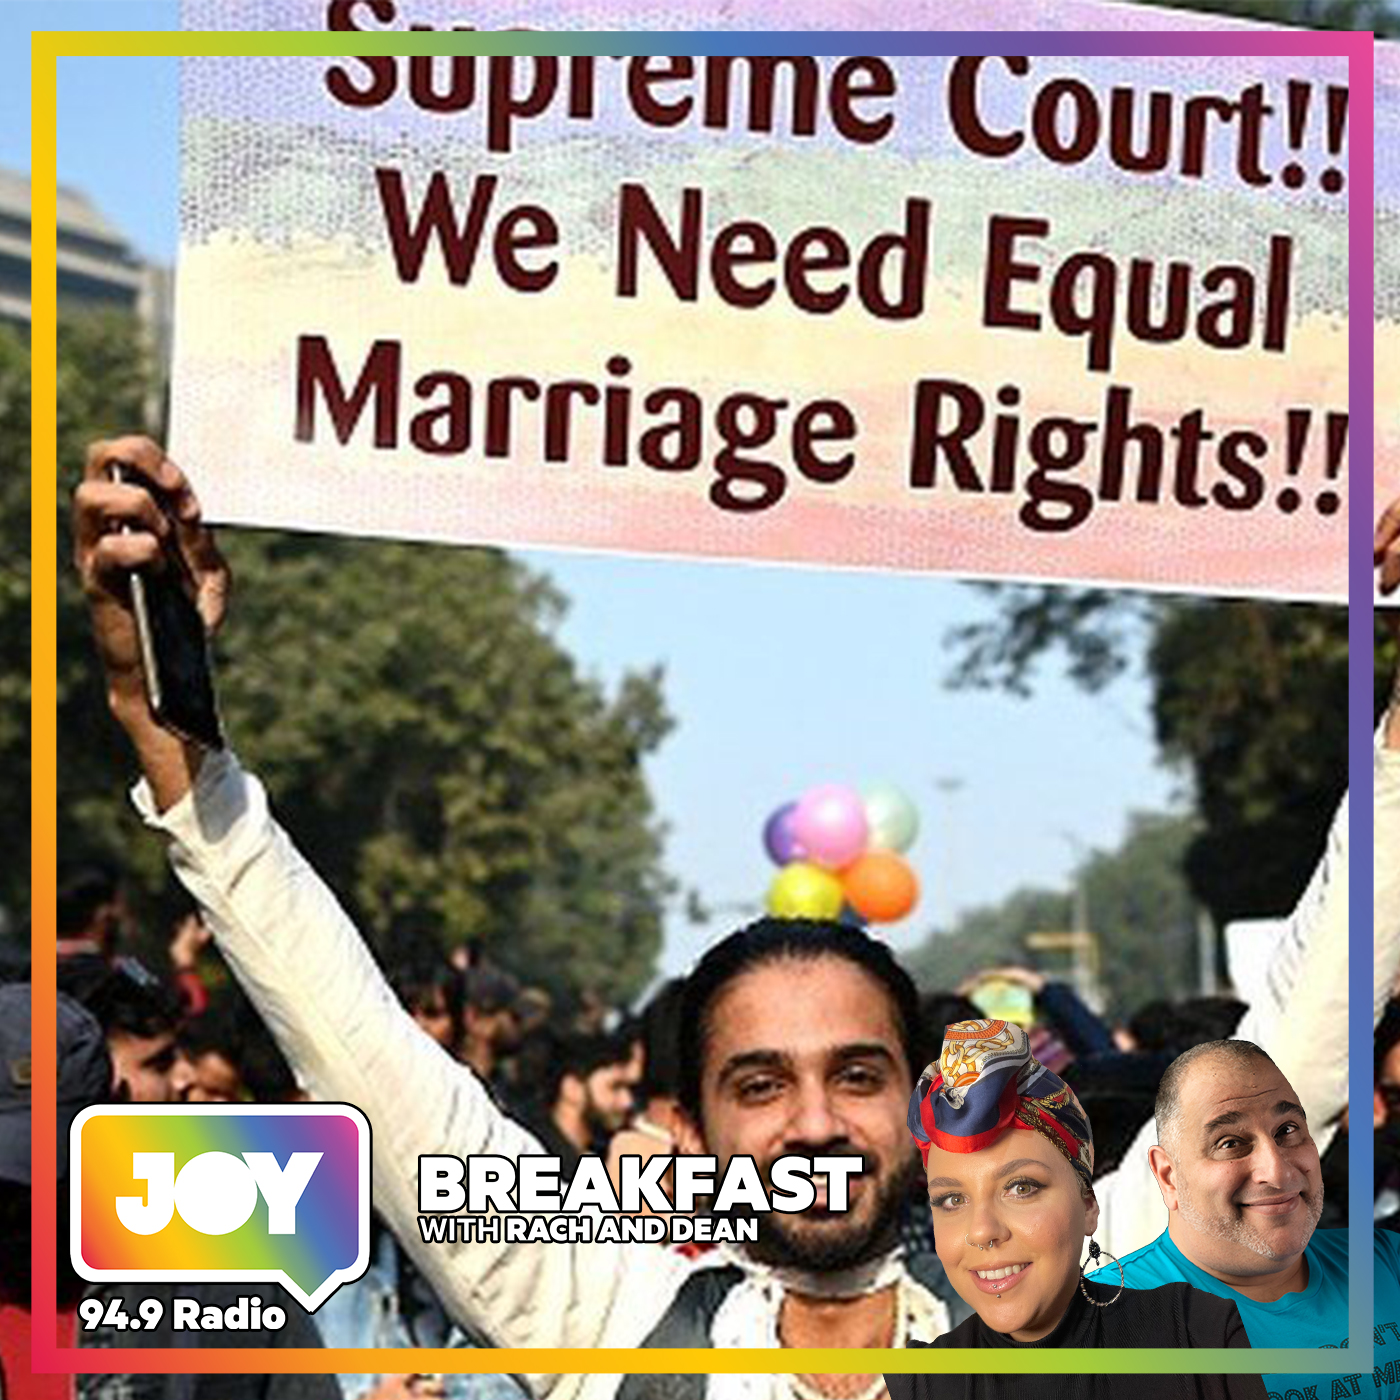 India’s Supreme Court declined same-sex marriage